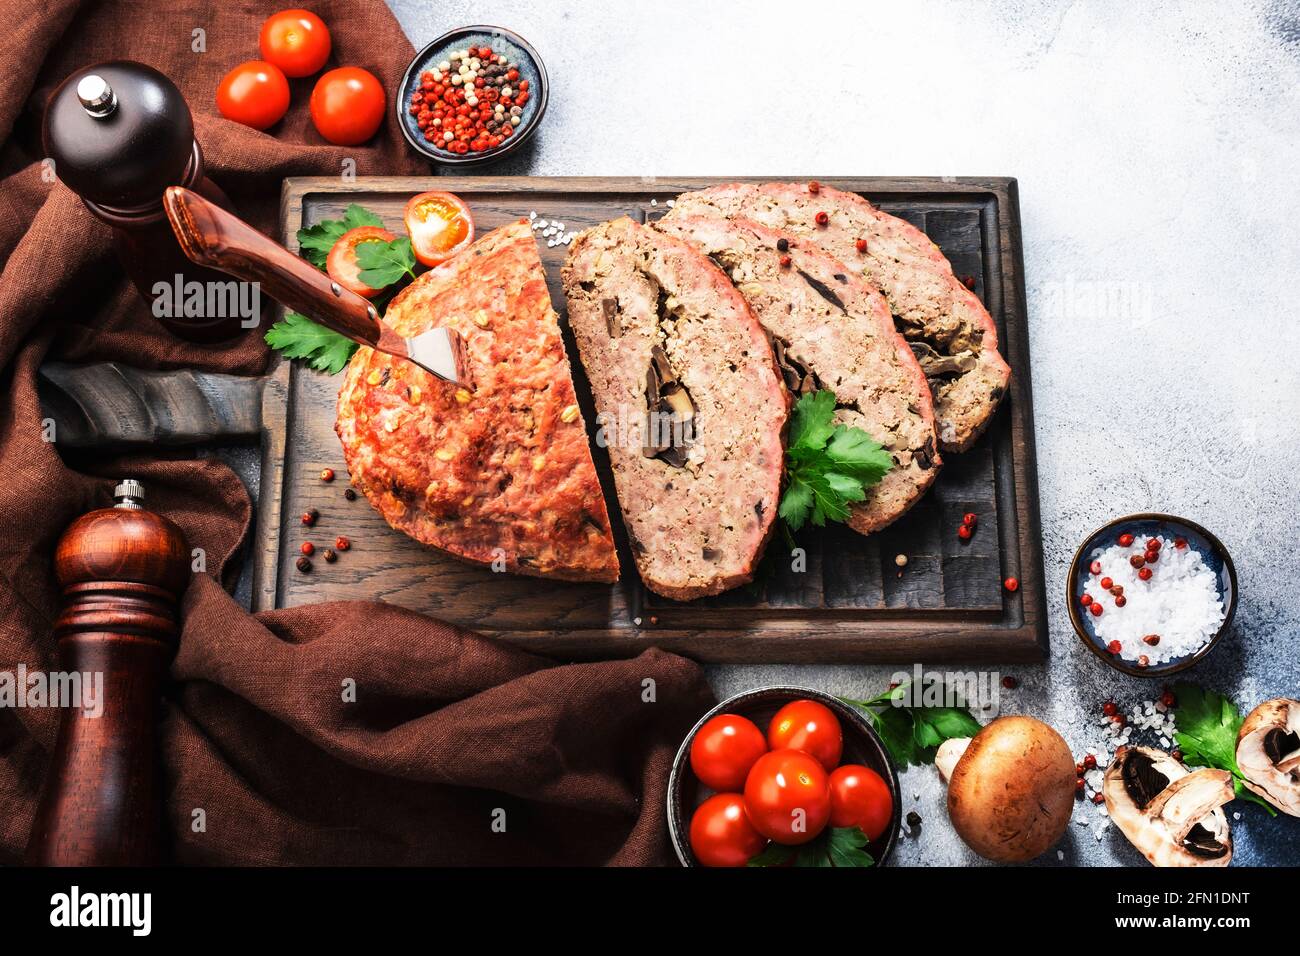 Meatloaf with mashrooms, classic american food with baked pork beef minced meat on cutting board. Top view Stock Photo